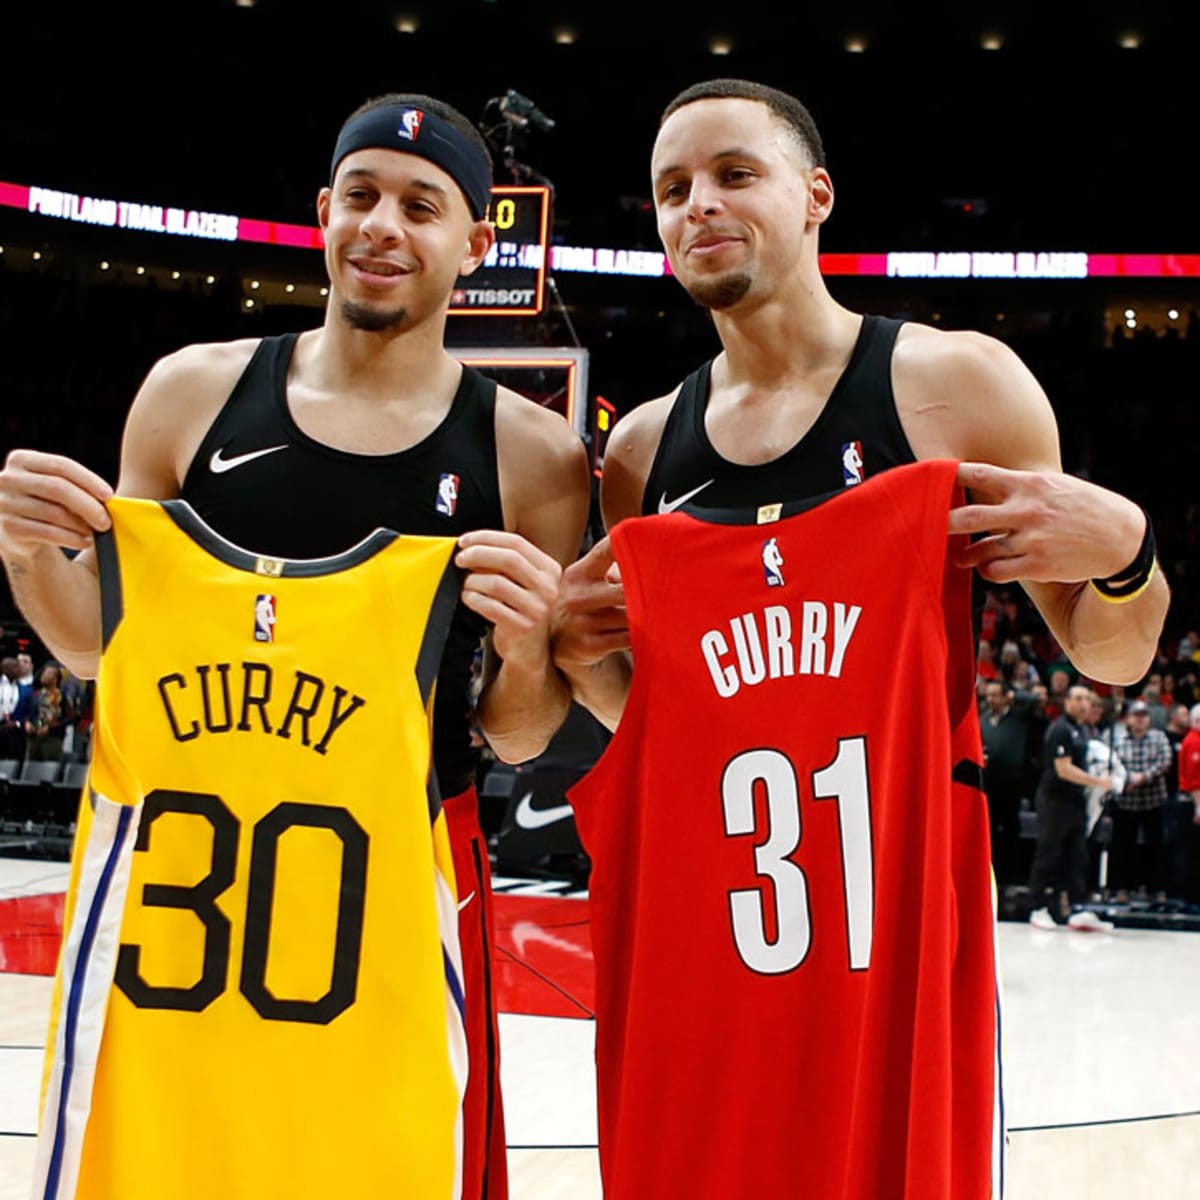 Seth Curry of Portland Trail Blazers to participate in 3-point